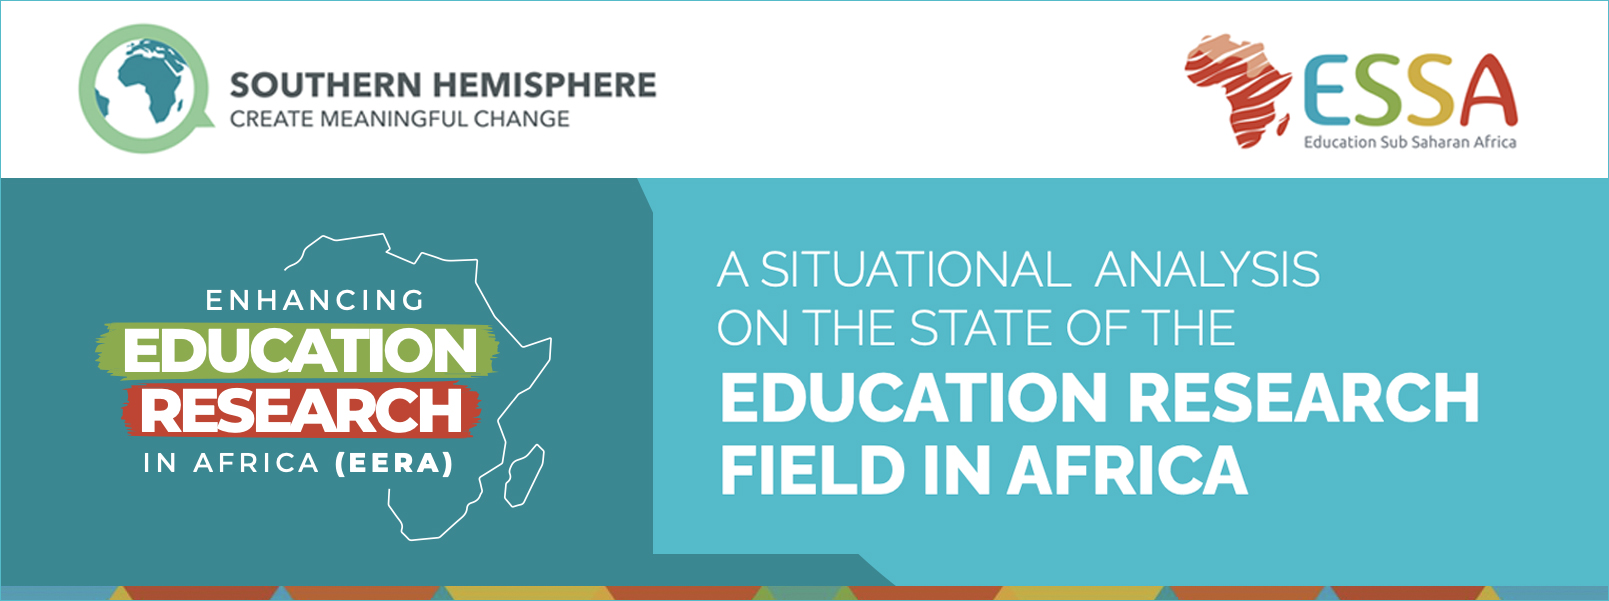 A Situational Analysis on the State of the Education Research Field in Africa